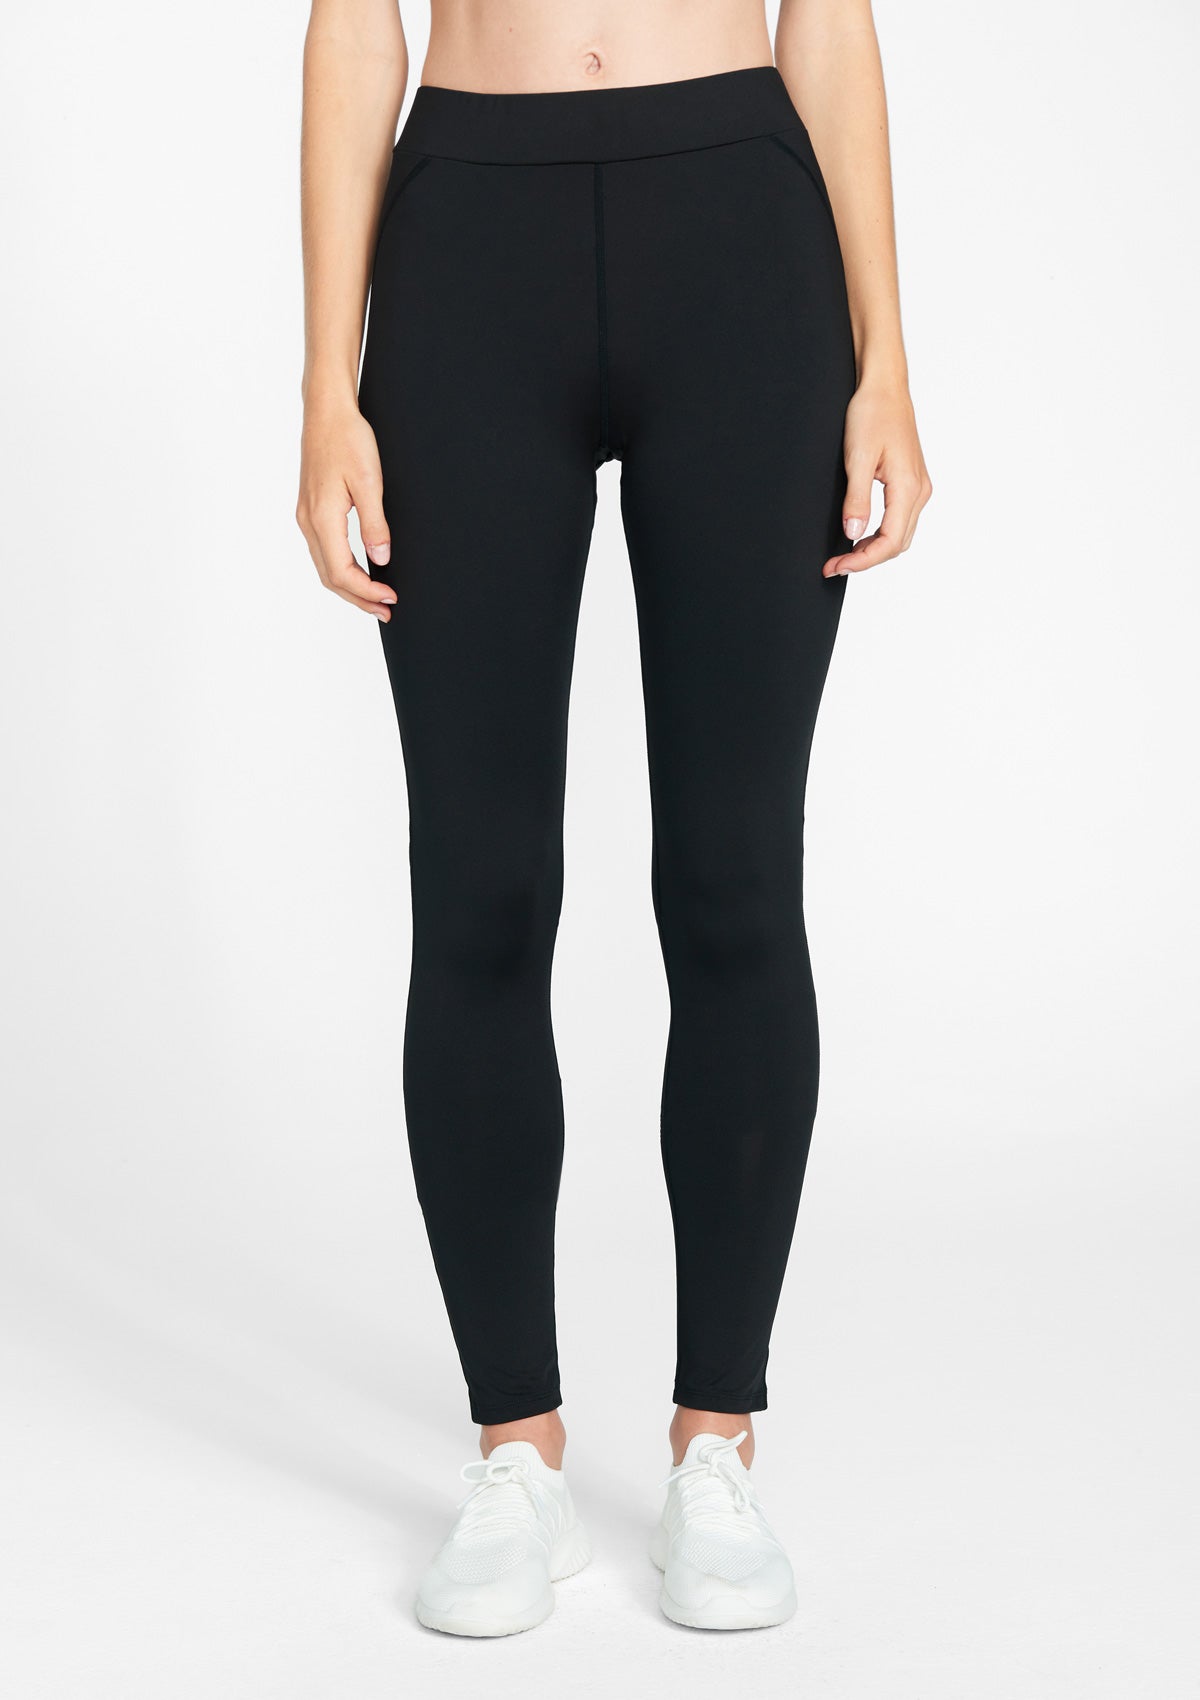 Alloy Apparel Tall Ashley Active Leggings for Women in Black Size M length 35 | Polyester